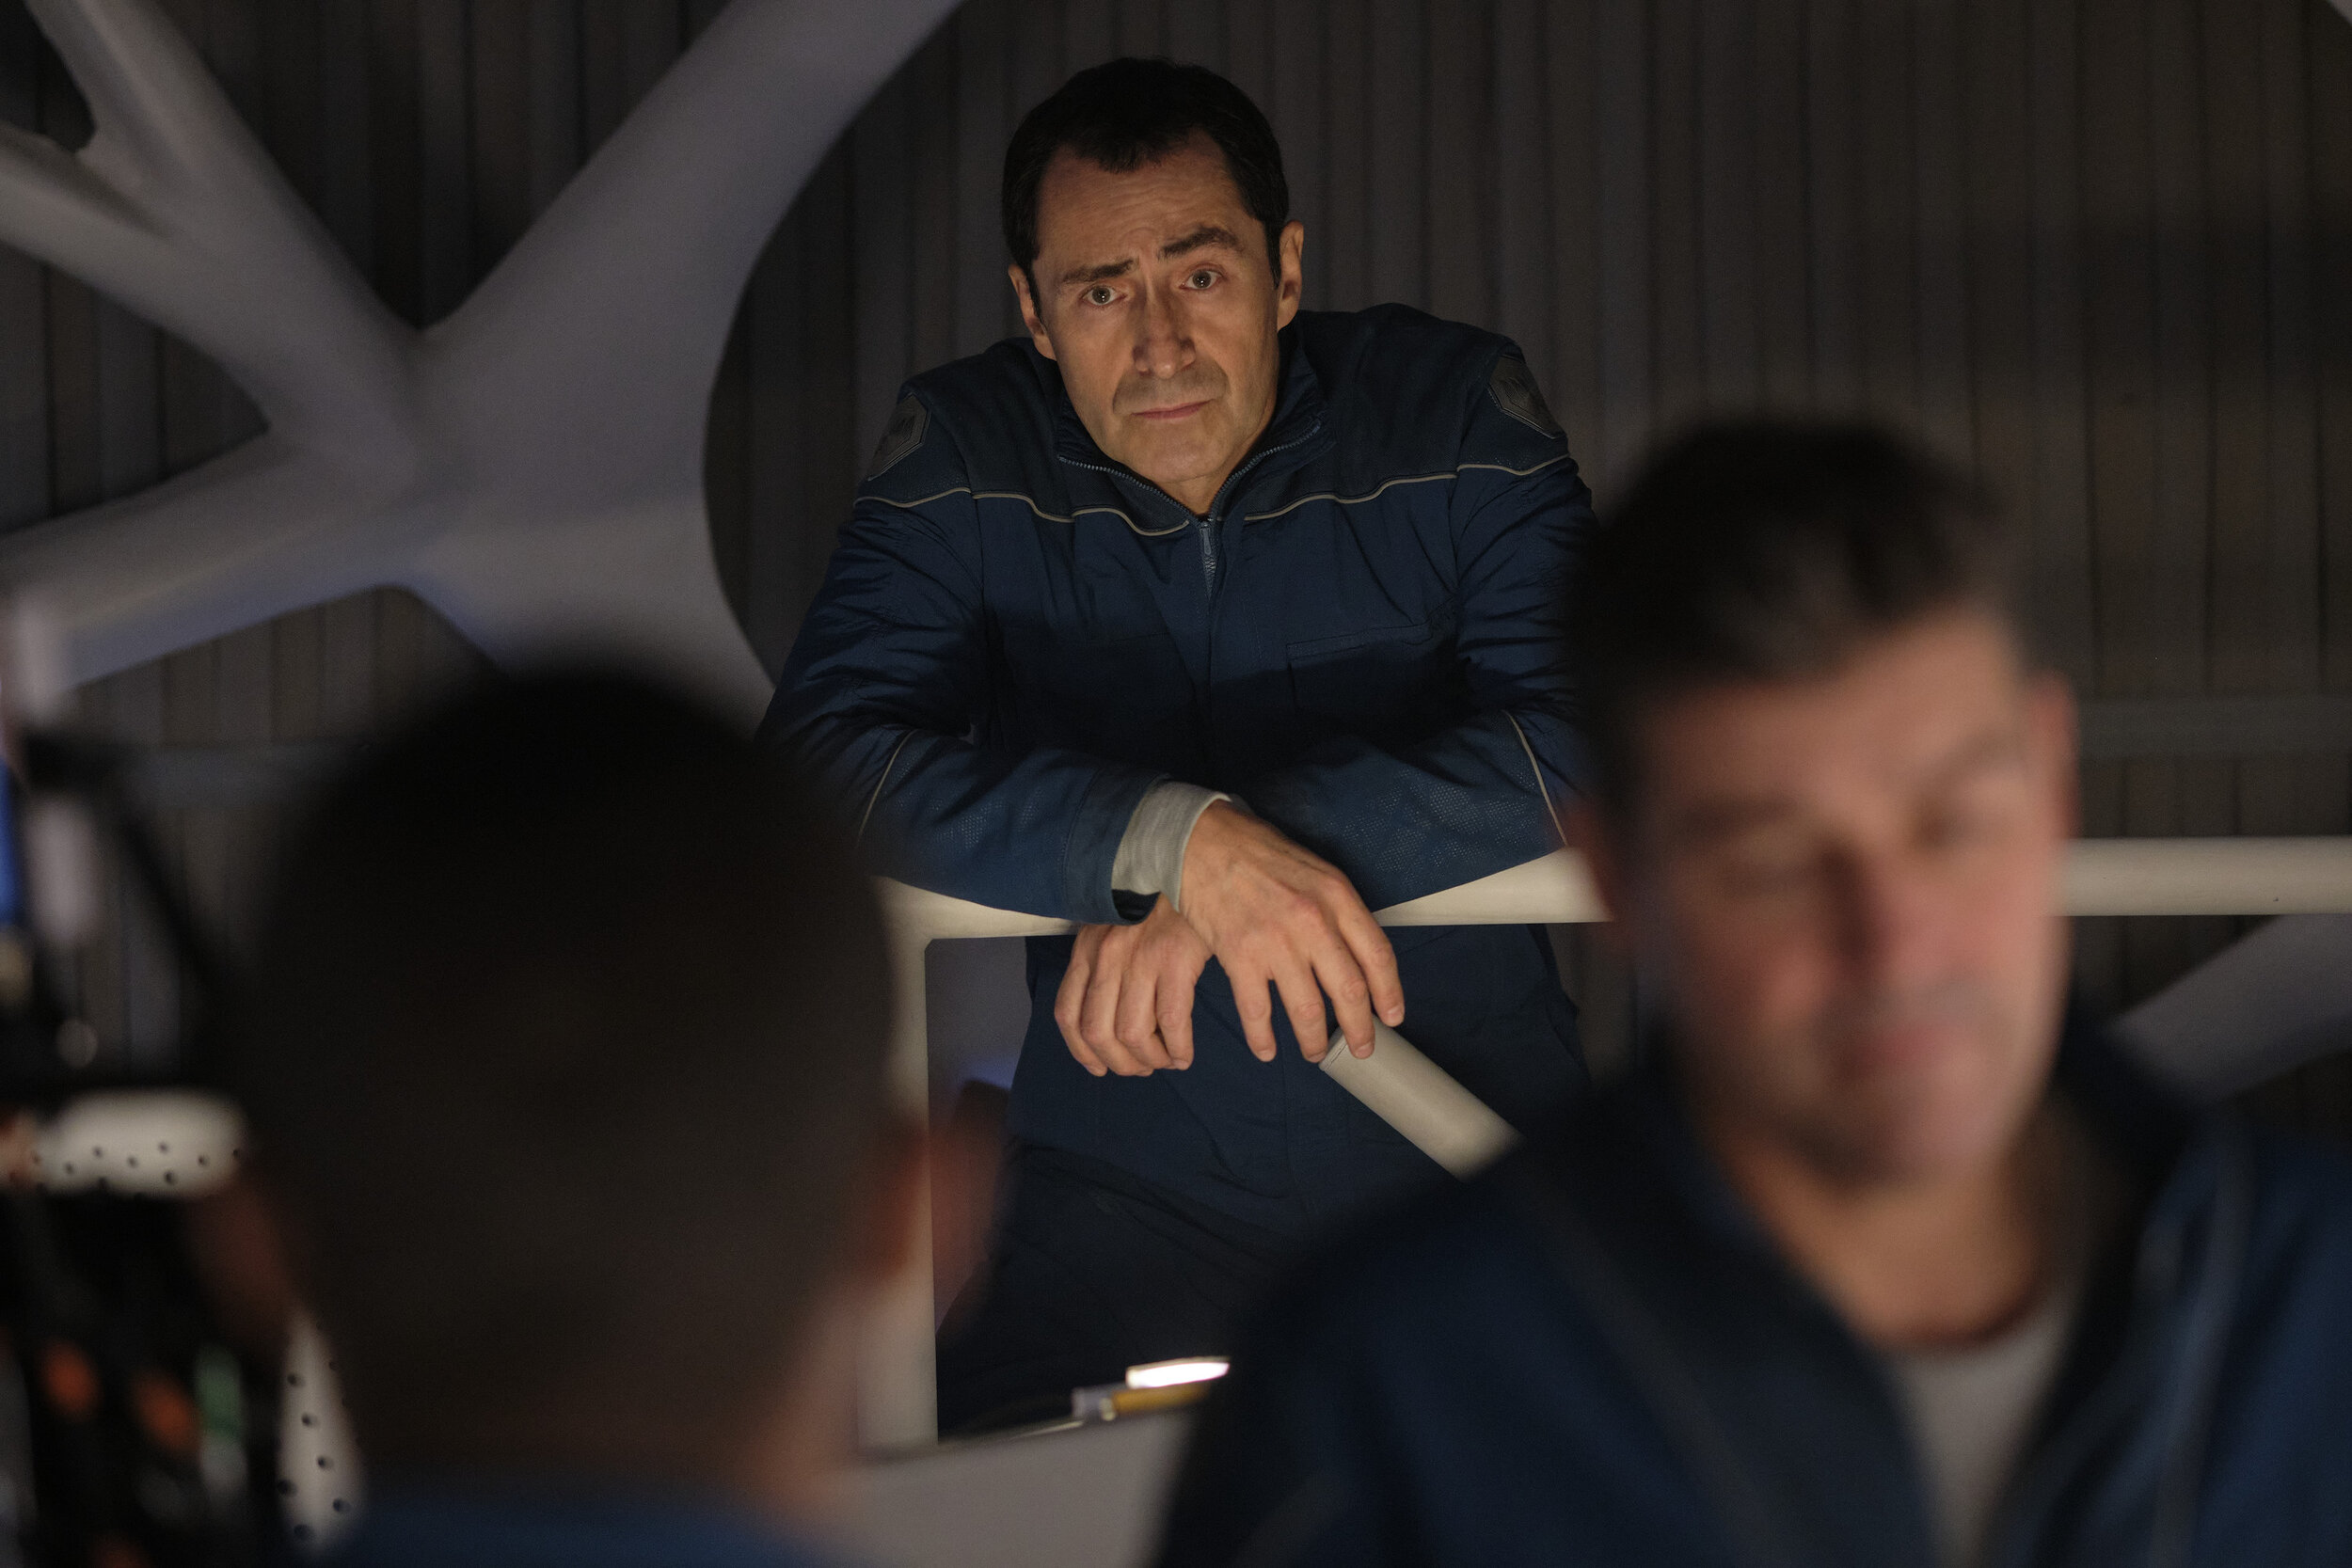  THE MIDNIGHT SKY (2020)Demian Bichir as Sanchez and Kyle Chandler as Mitchell. Cr. Philippe Antonello/NETFLIX 